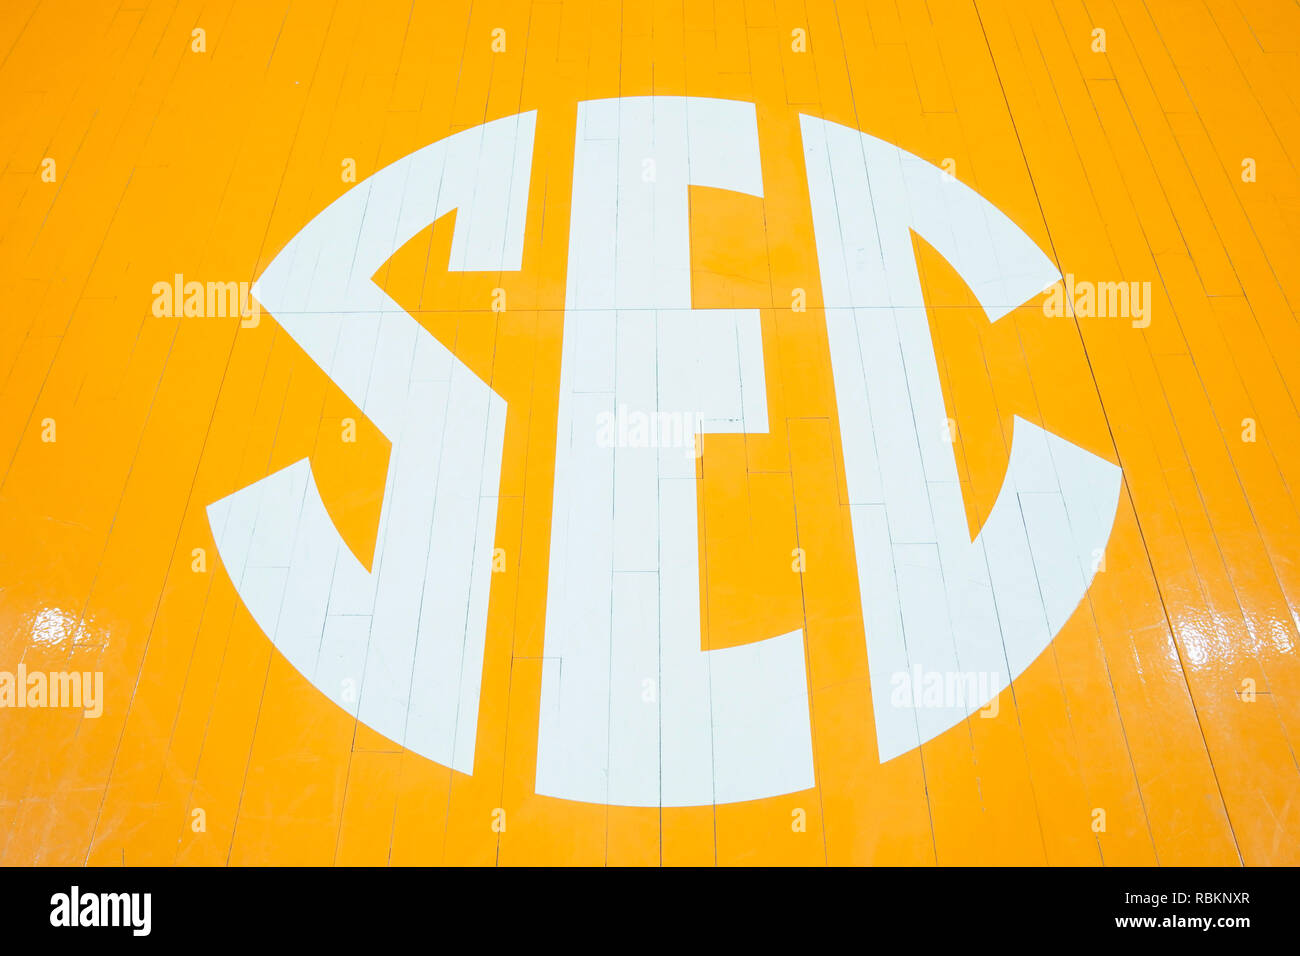 January 10, 2019: The Southeastern Conference Logo on the court before the NCAA basketball game between the University of Tennessee Lady Volunteers and the University of Kentucky Wildcats at Thompson Boling Arena in Knoxville TN Tim Gangloff/CSM Stock Photo